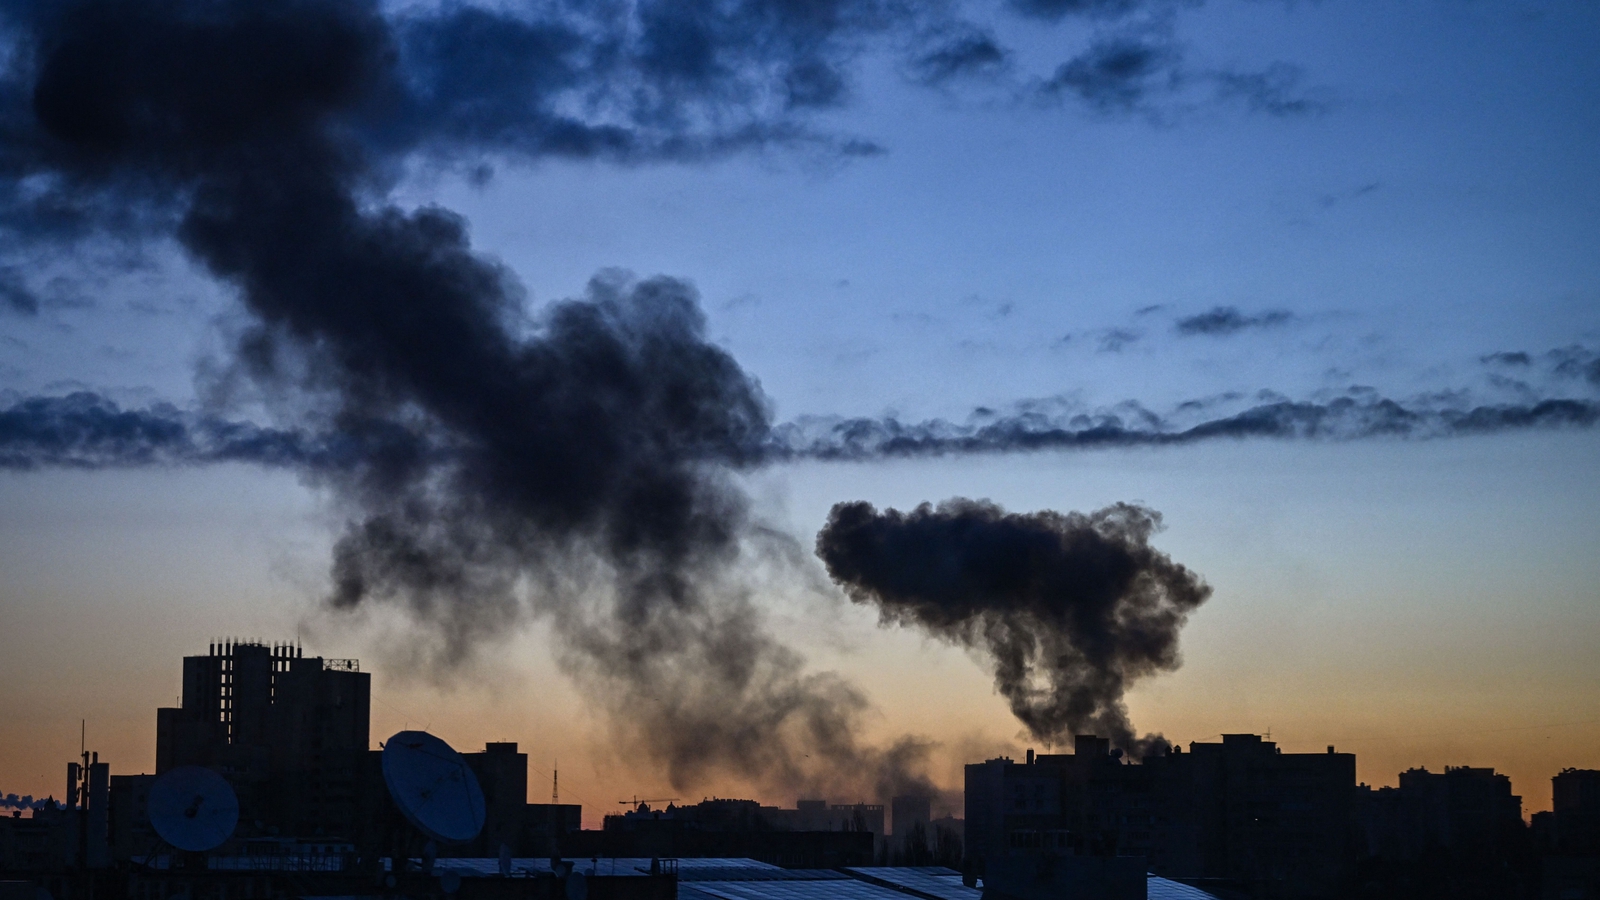 Image - Smoke rises after an explosion in Kyiv on 16 March